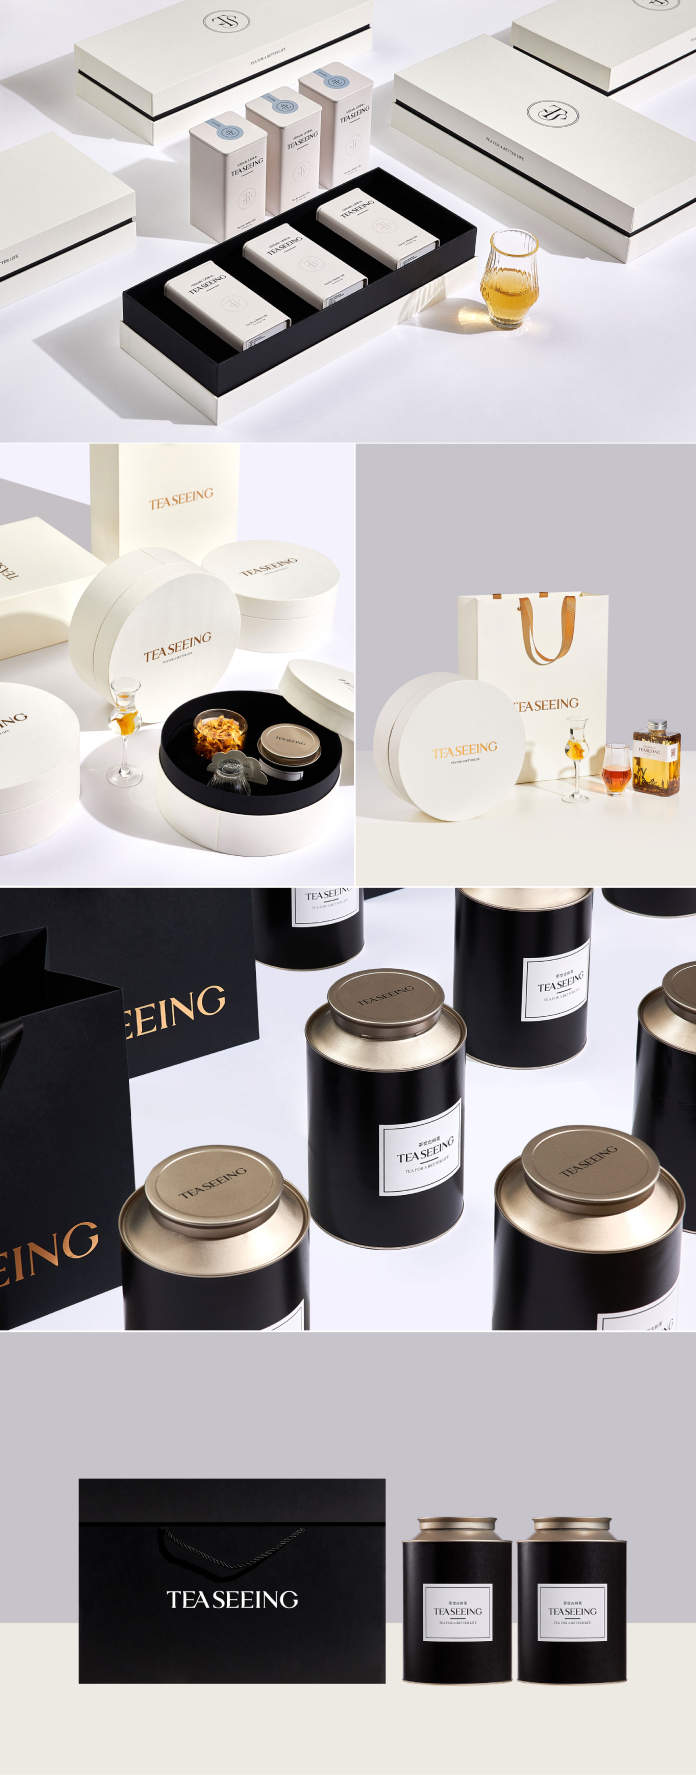 Teaseeing brand Mid-Autumn Festival gift packaging design by Yuandesign Studio.